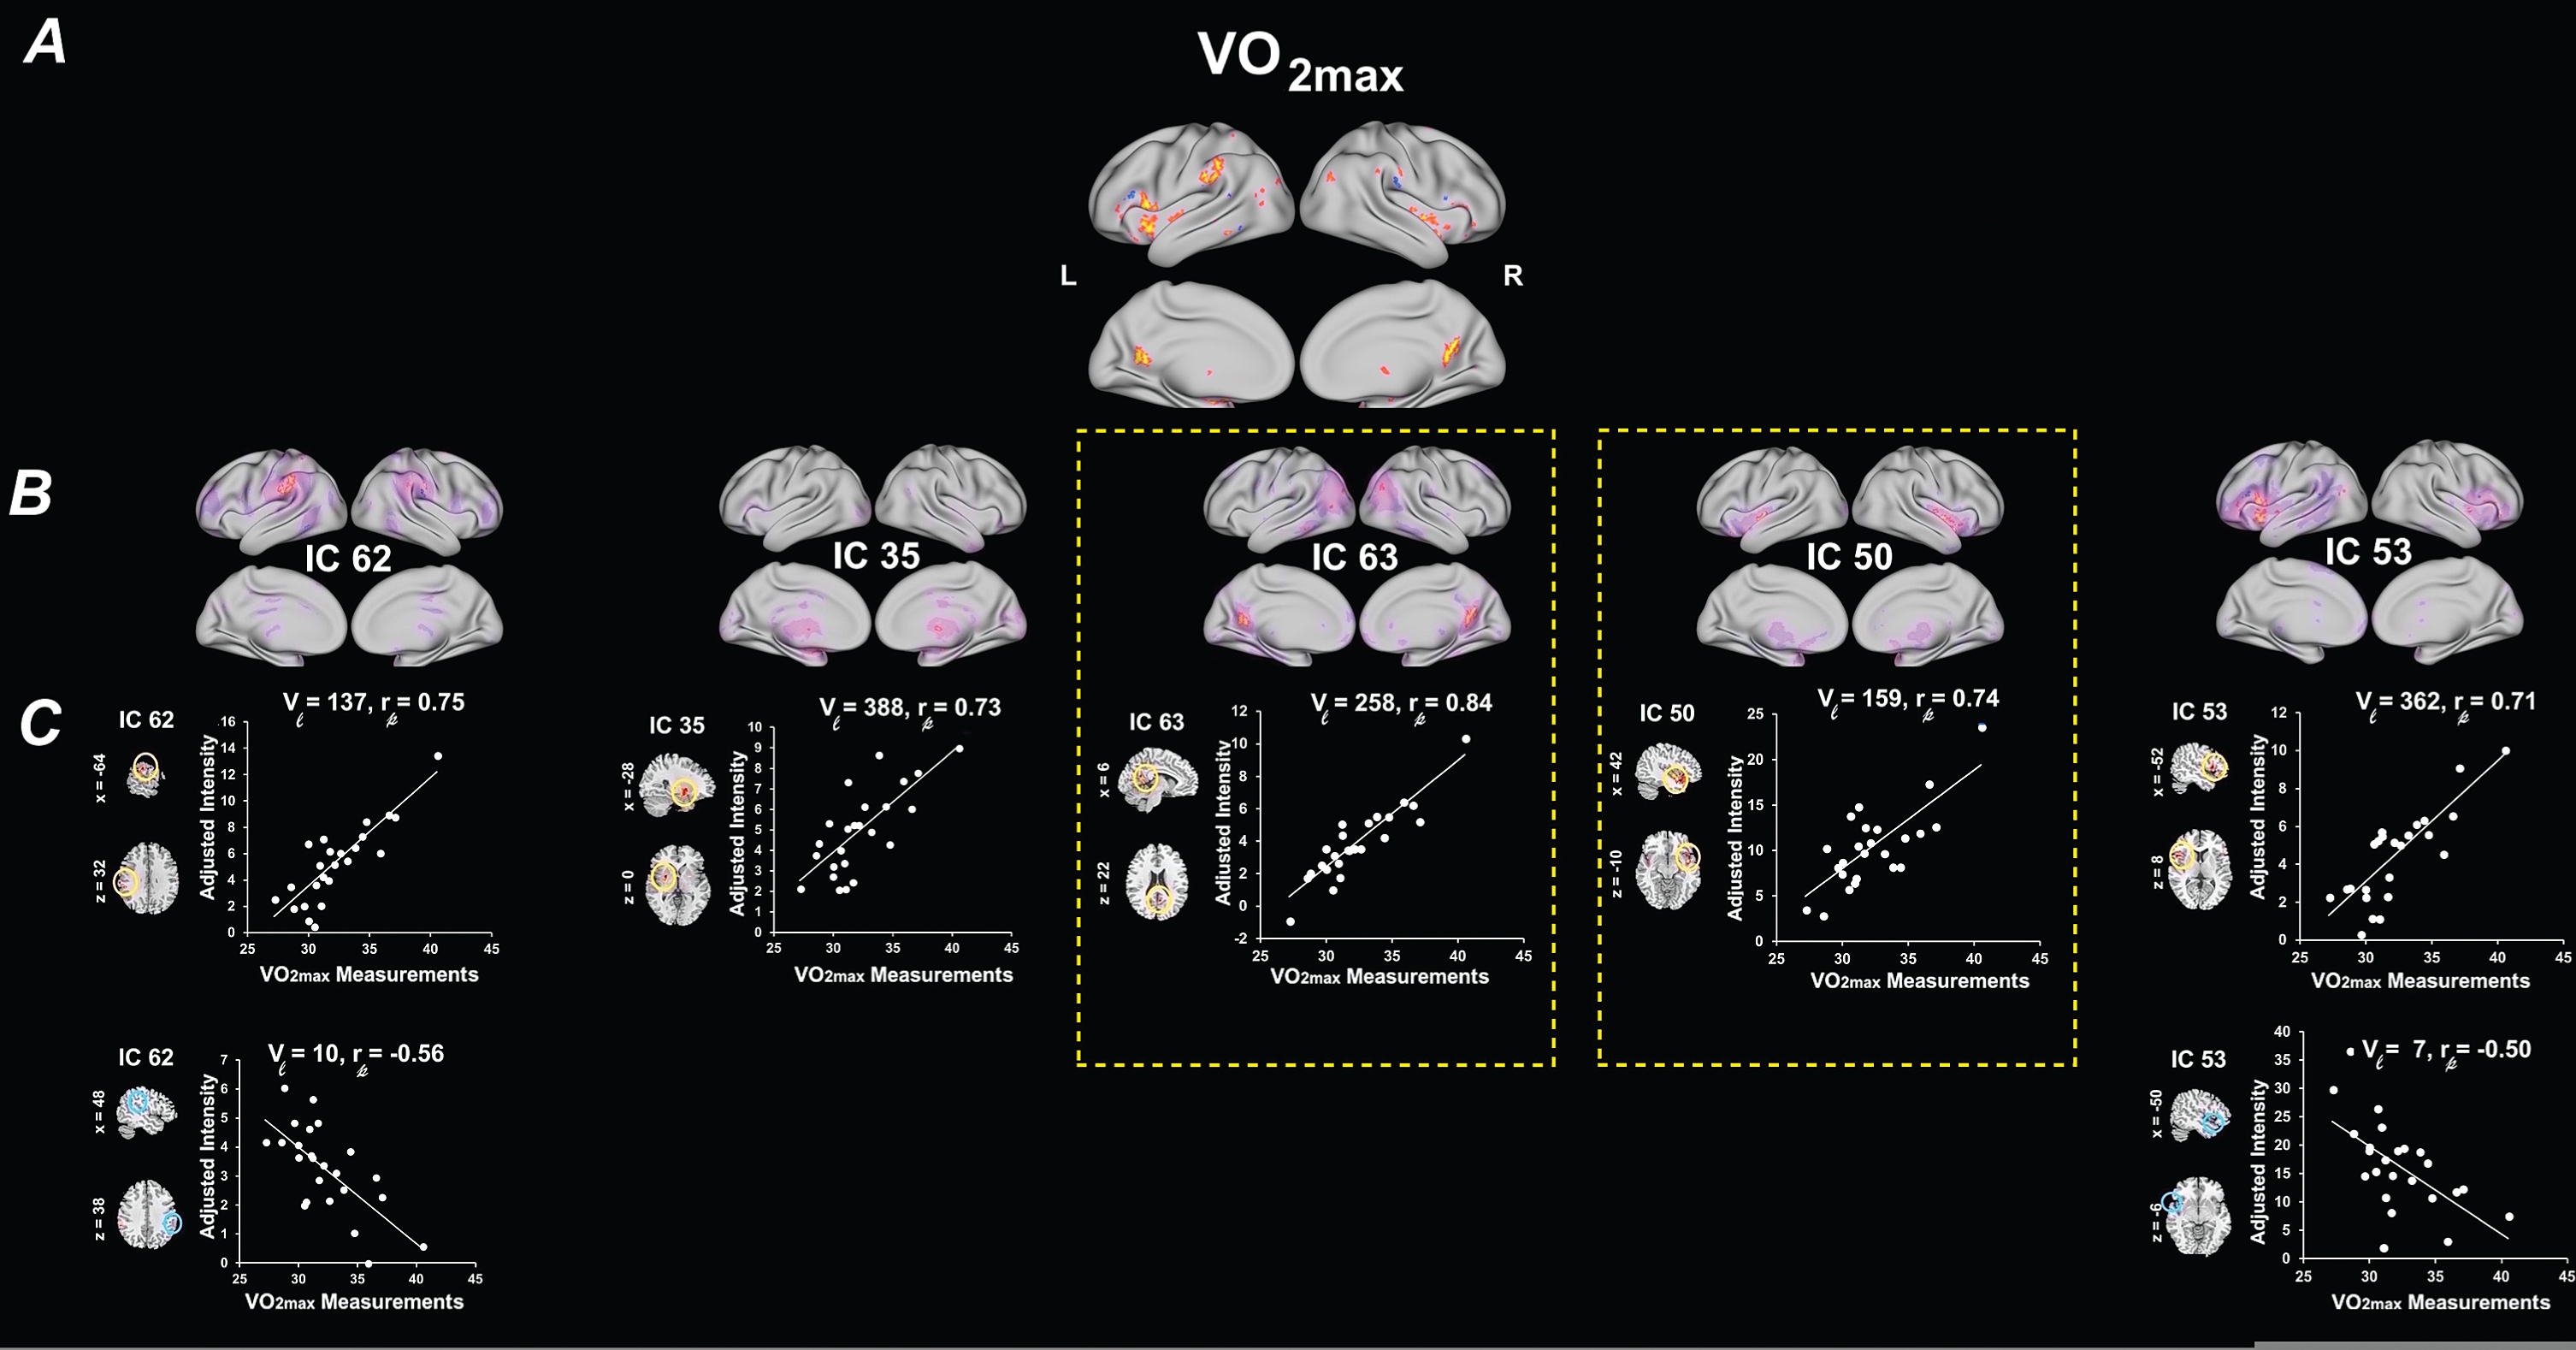 Univariate results summarizing the effects of estimated VO2max on RSN spatial map intensities. (A) 3D brain map depicting the composite renderings of significant effects of estimated VO2max over all RSNs are displayed as the –sign(t)log10(p) (p < 0.05, uncorrected). (B) Significant effects of estimated VO2max are shown in individual RSNs overlaid on their corresponding RSN template (purple) and displayed as the –sign(t)log10(p) (p < 0.05, uncorrected). (C) Scatter plots show the estimated VO2max effects for the largest significant cluster in each affected RSN (indicated by yellow or blue circles on the RSN maps shown in representative orthogonal slices with corresponding MNI coordinates) with the number of contributing voxels (Vl), and the partial correlation coefficient (rp). RSNs of significance are highlighted by yellow boxes with dashed lines. See Table 3 for the associated statistics, anatomical extent, the t-value of the maxima, and corresponding MNI coordinates for the largest significant clusters. Estimated VO2max, maximal oxygen uptake.; SMN, sensorimotor networks; SCN, subcortical networks; DMN, default-mode networks; CAN, cognitive and attention networks; L, left; R, right.